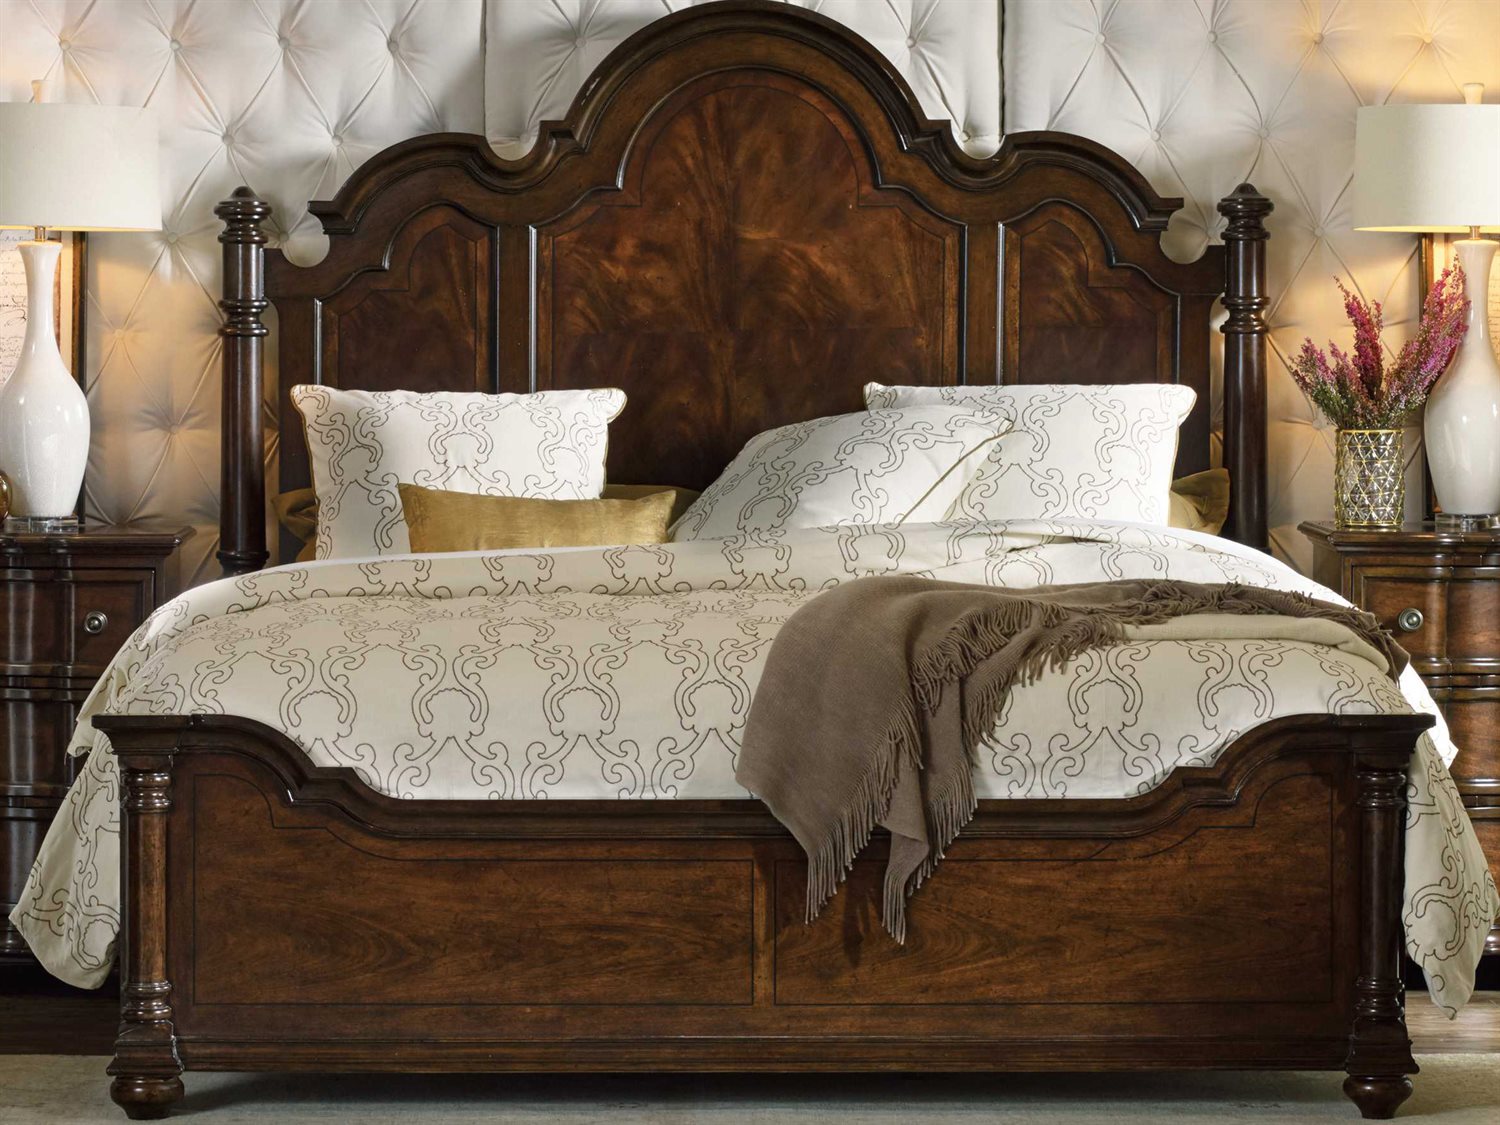 Furniture Leesburg Rich, King Size Mahogany Poster Bed